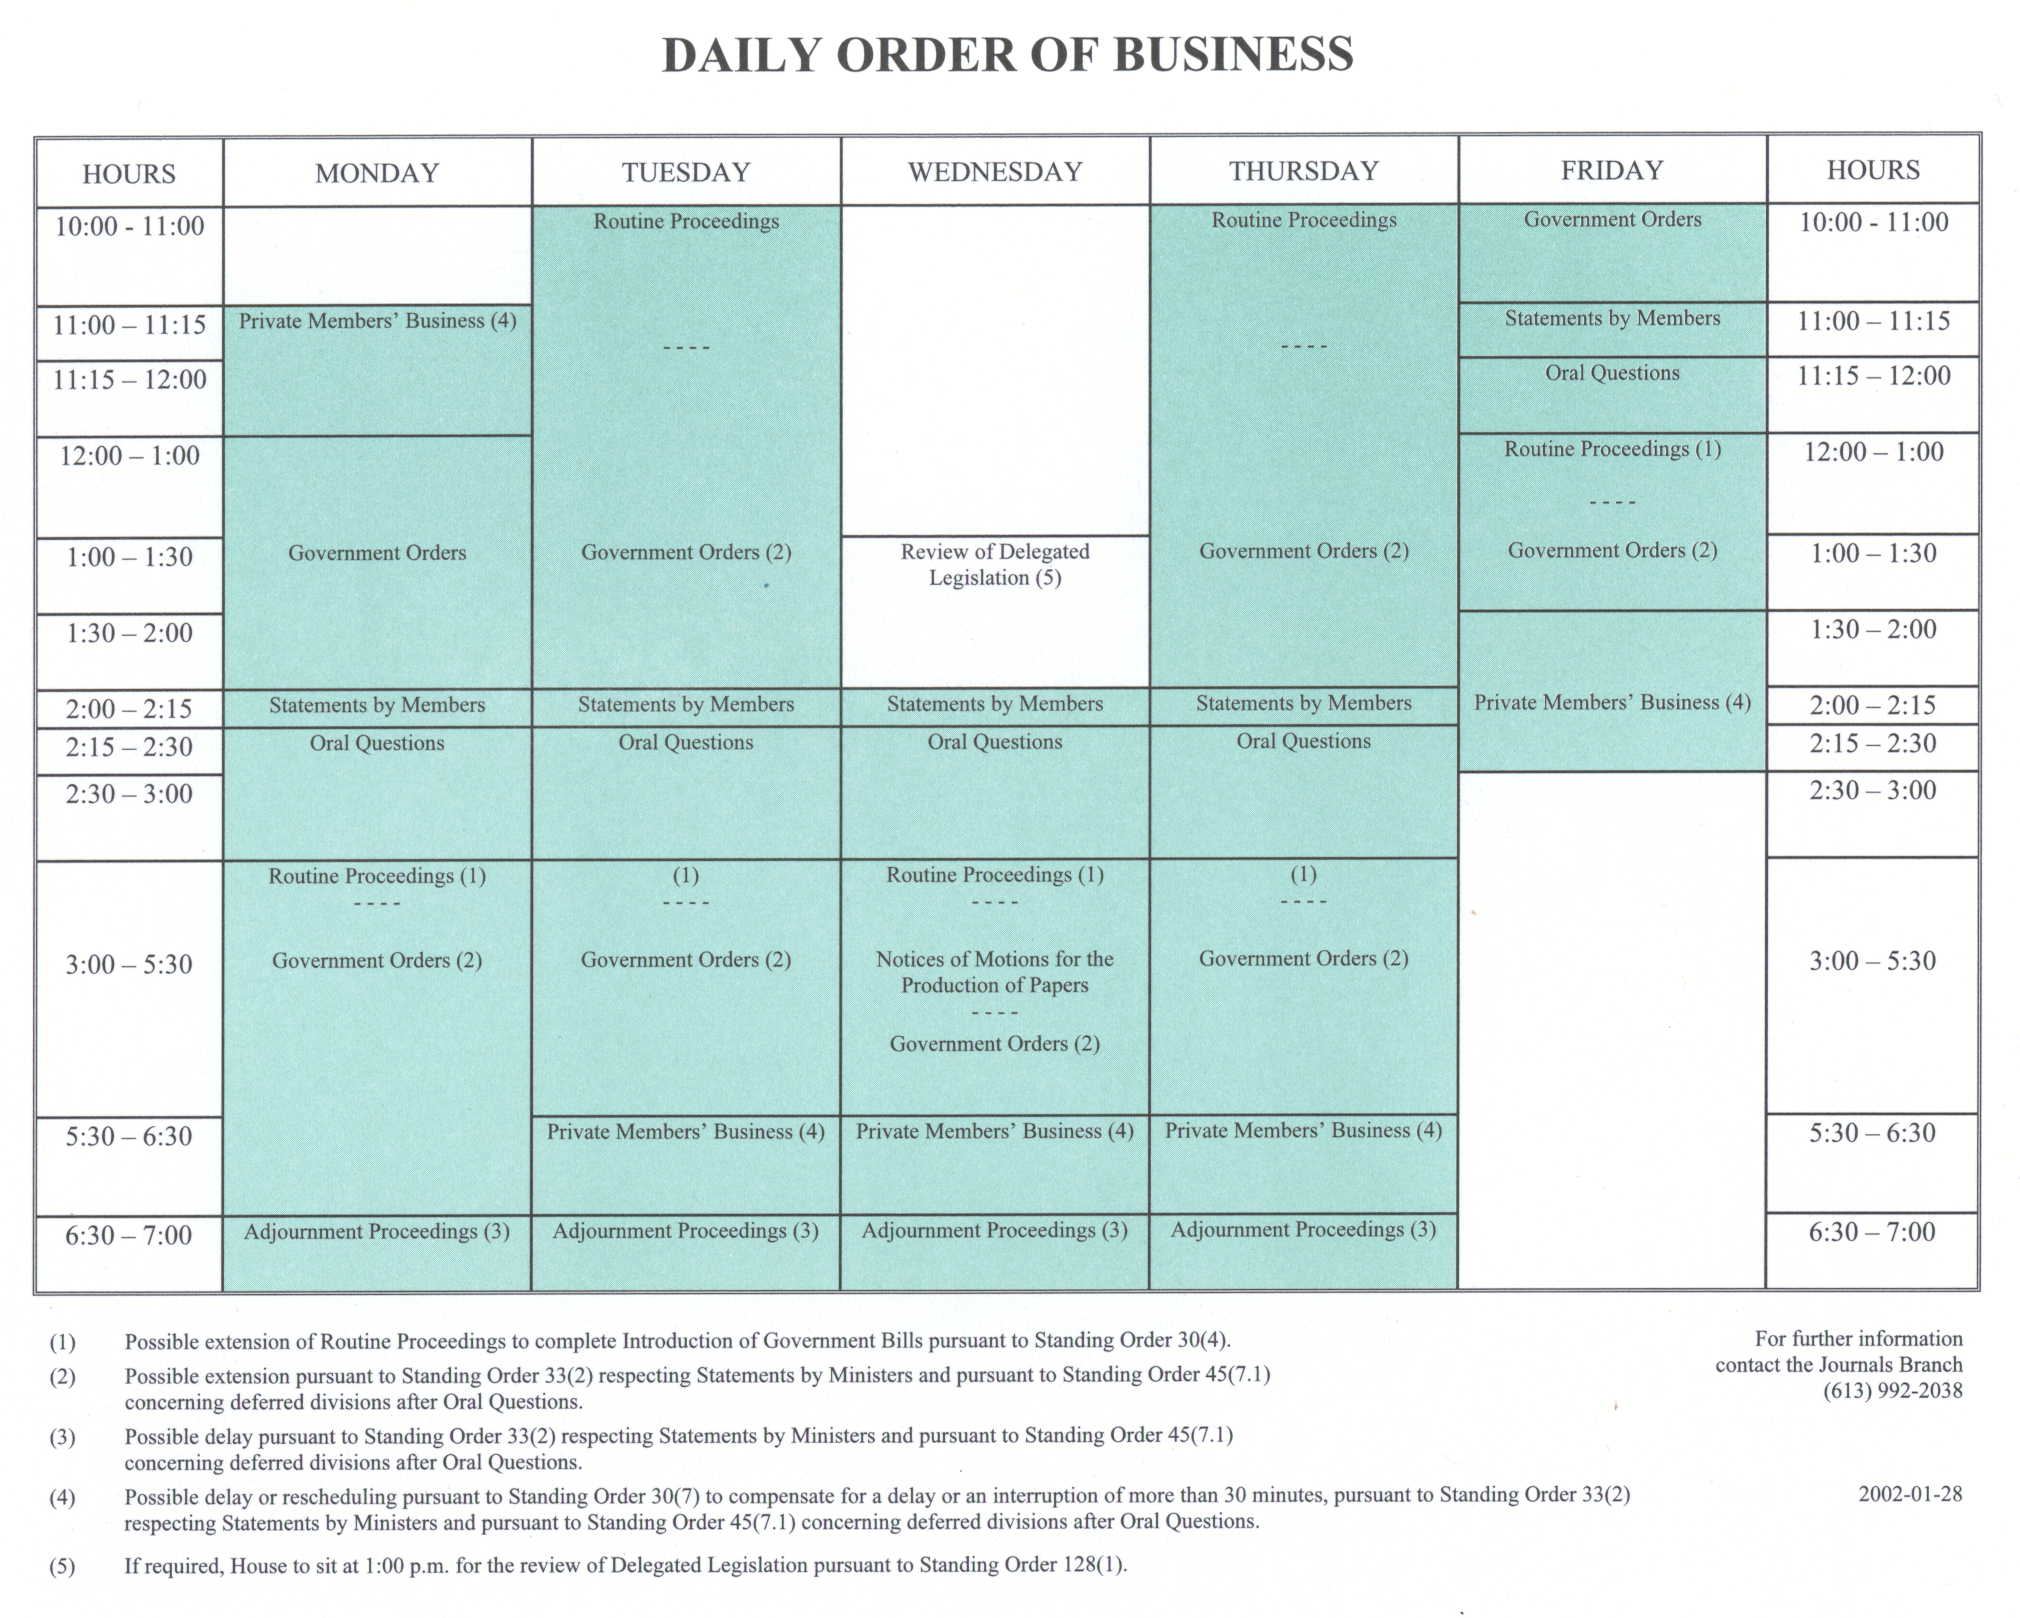 Image showing, in a table, the weekly calendar of the House of Commons. The first and last columns list, by row, the times of day. The remaining columns in the middle correspond to the days of the week. In the body of the table, users can find the items of business dealt with on particular days at particular times.